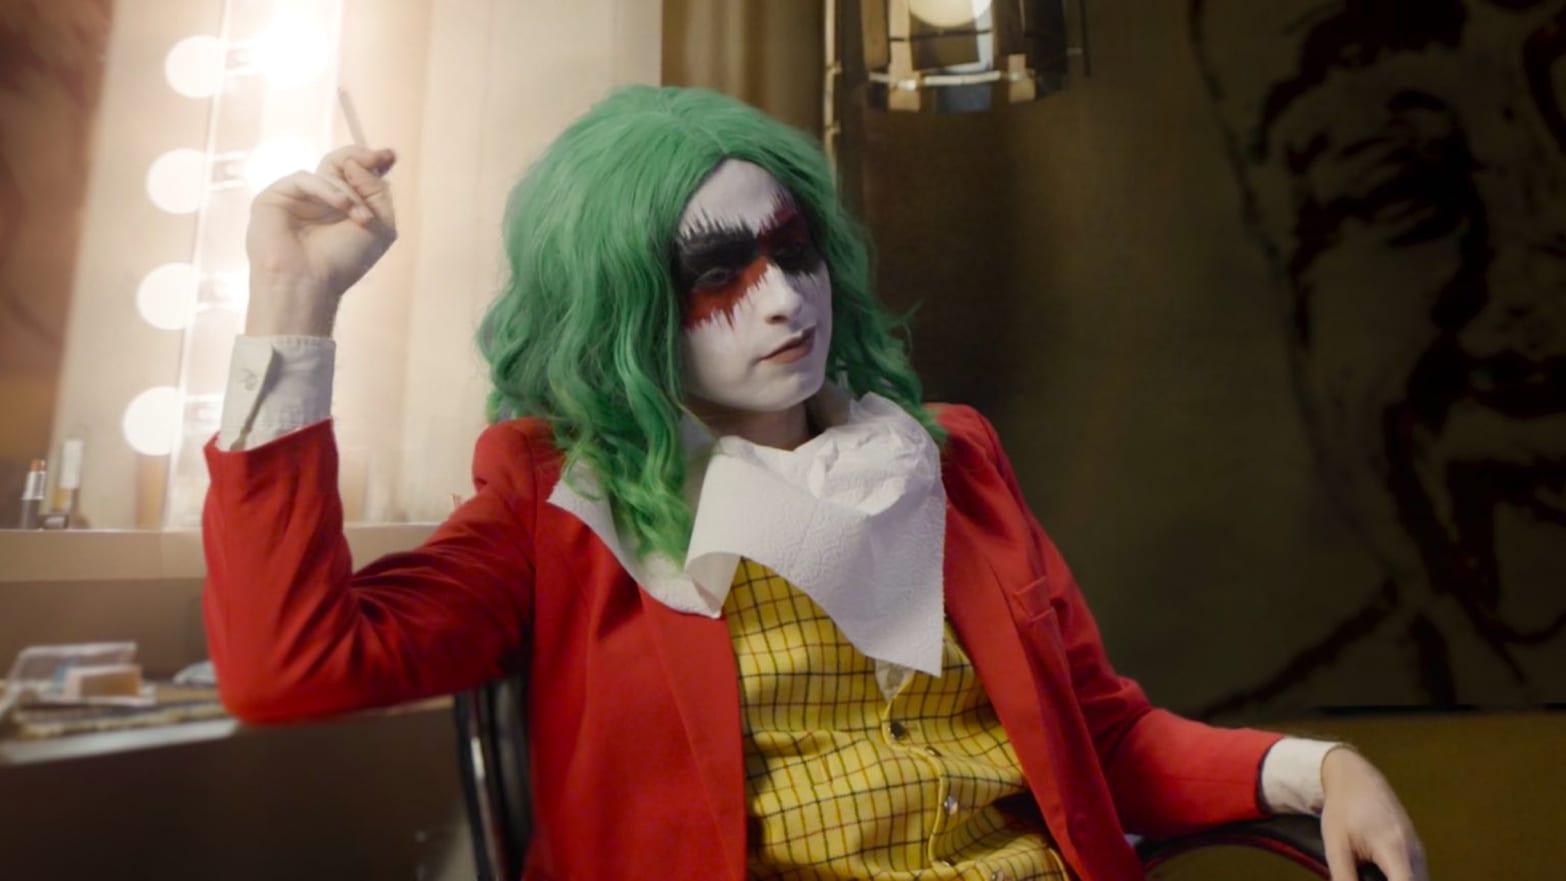 The Peoples Joker Is a Trippy Movie That Turns the Joker Into a Trans Origin Story pic